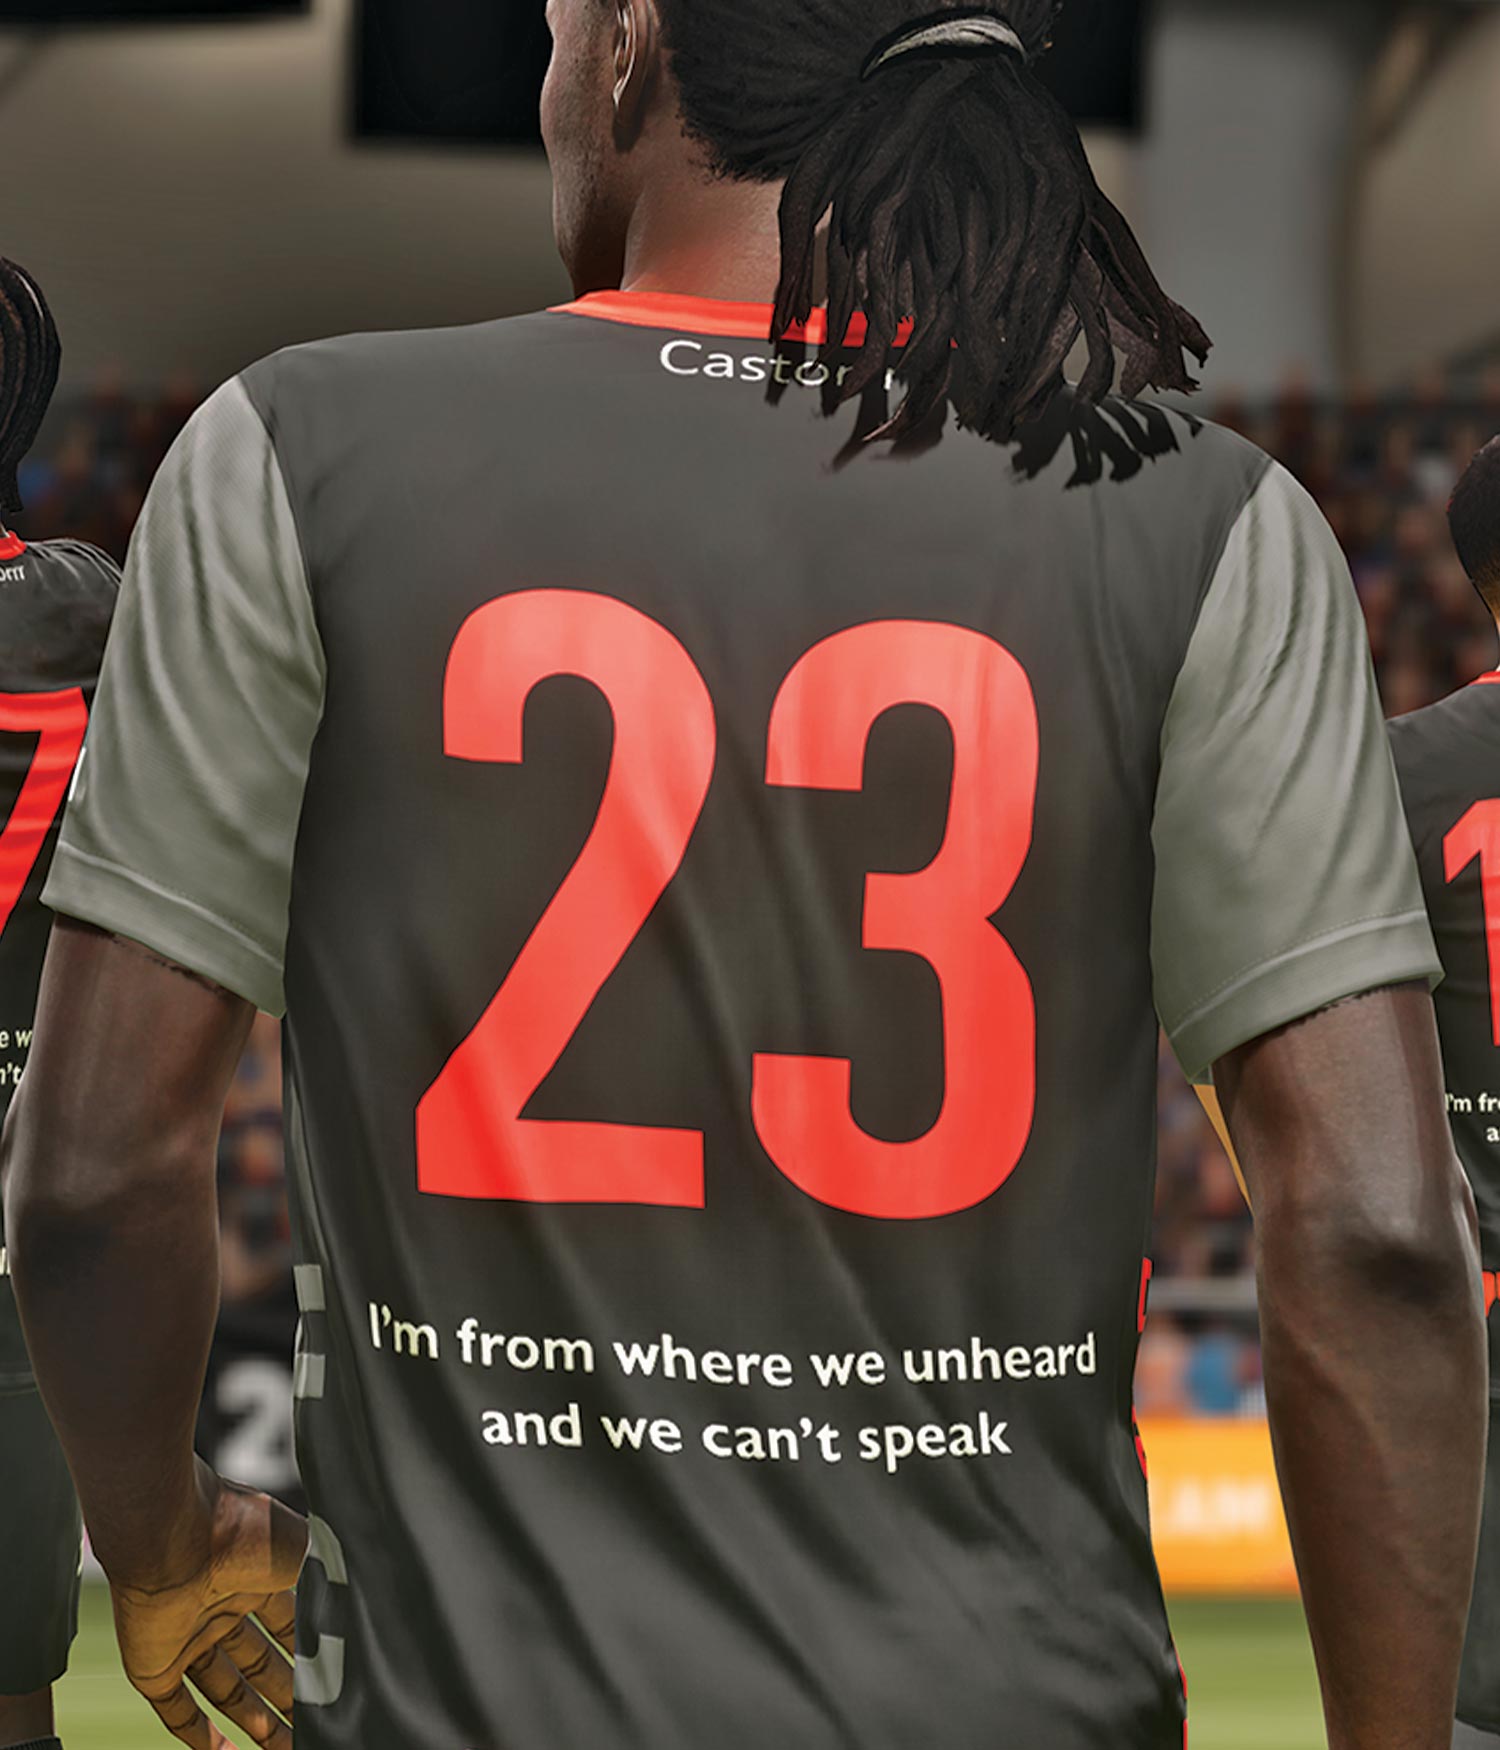 This red, black, and gray student-designed jersey features the red number "23" in large font and the message "I'm from where we unheard and we can't speak" in smaller, white font.